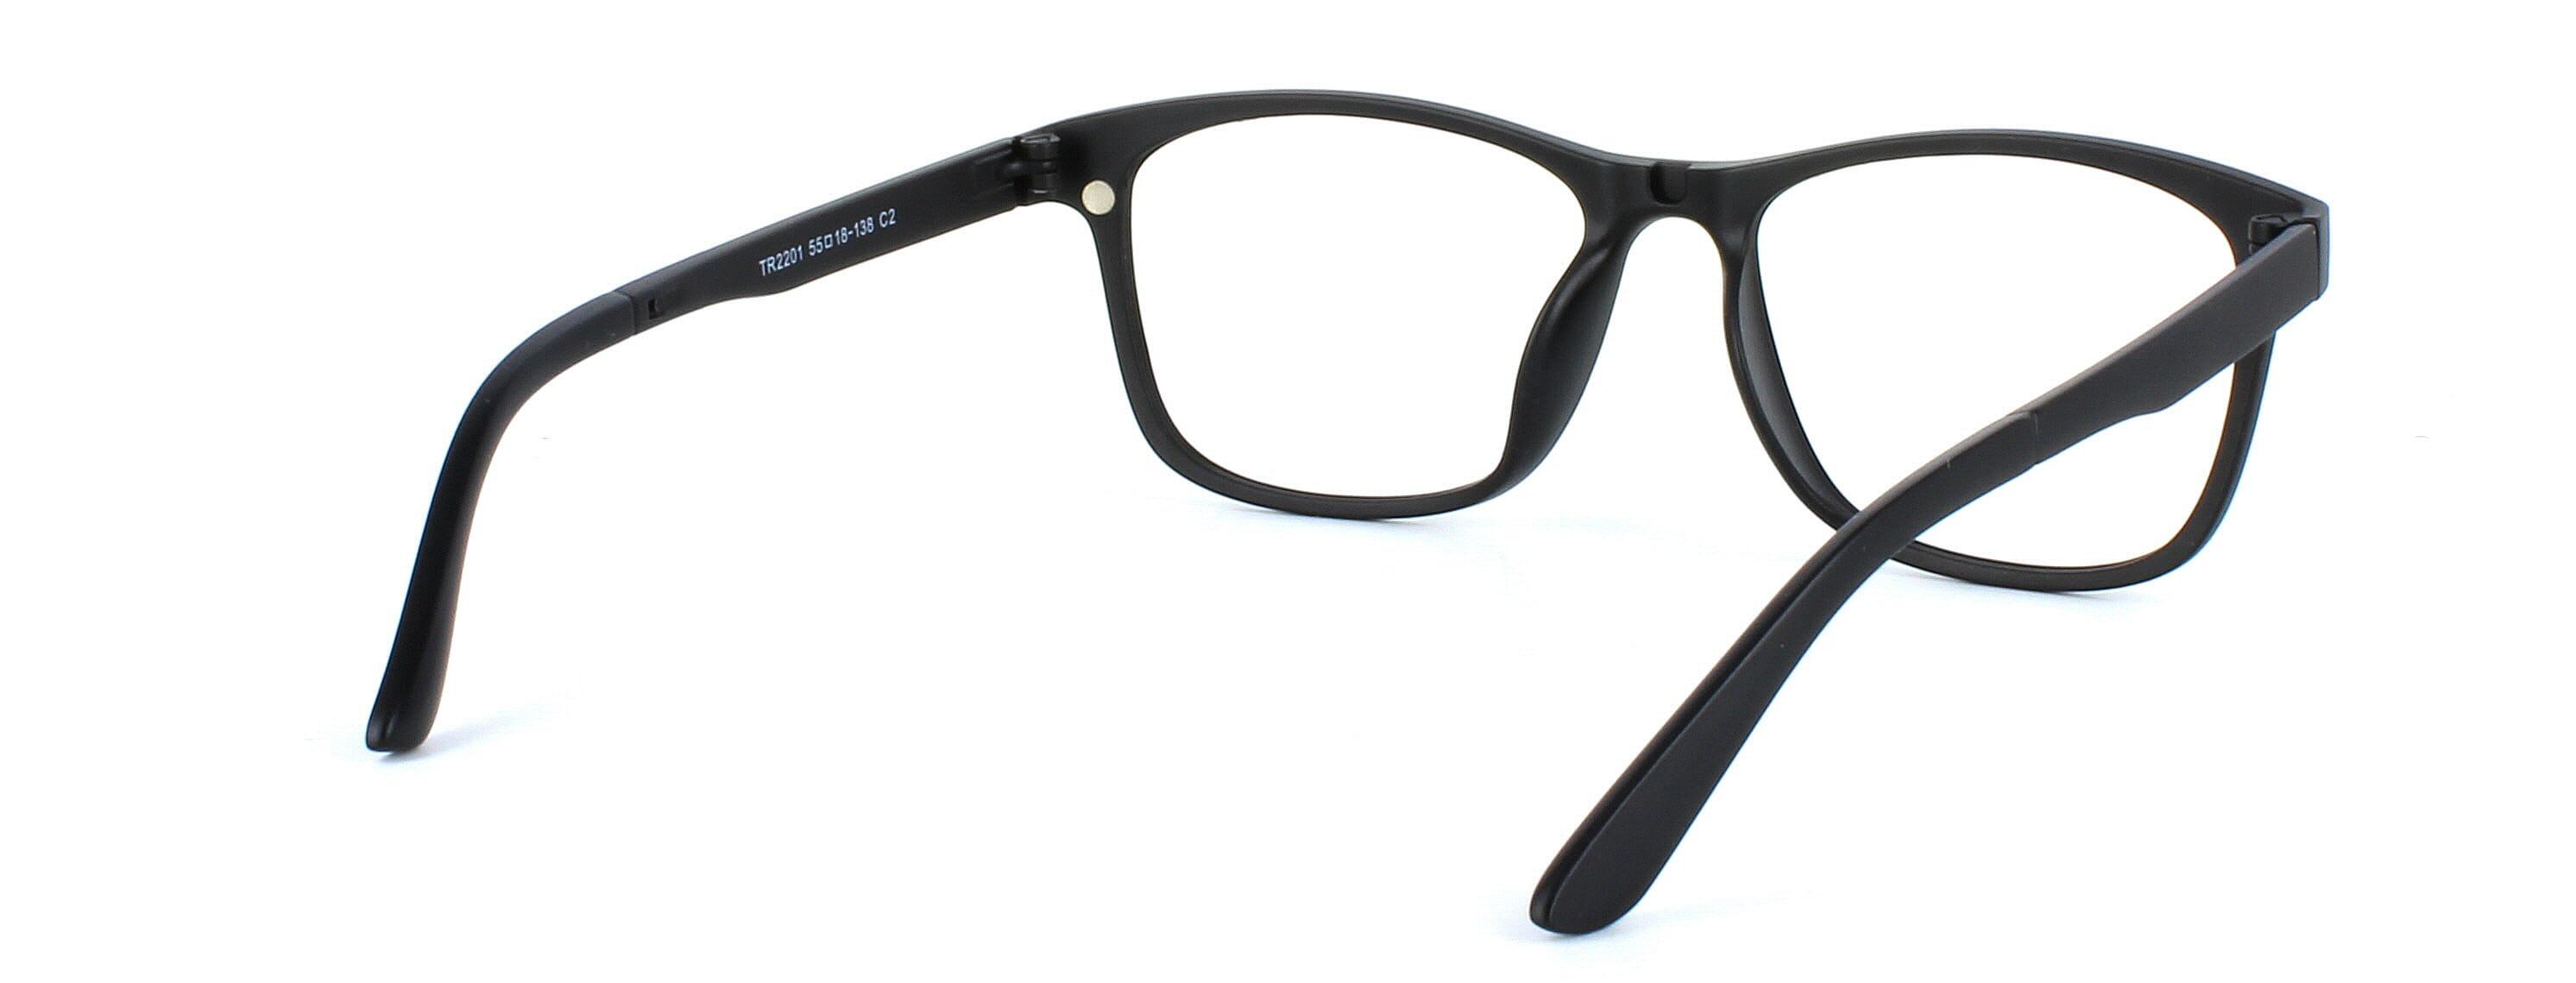 Unisex TR90 lightweight glasses with various clip on lenses - image view 3